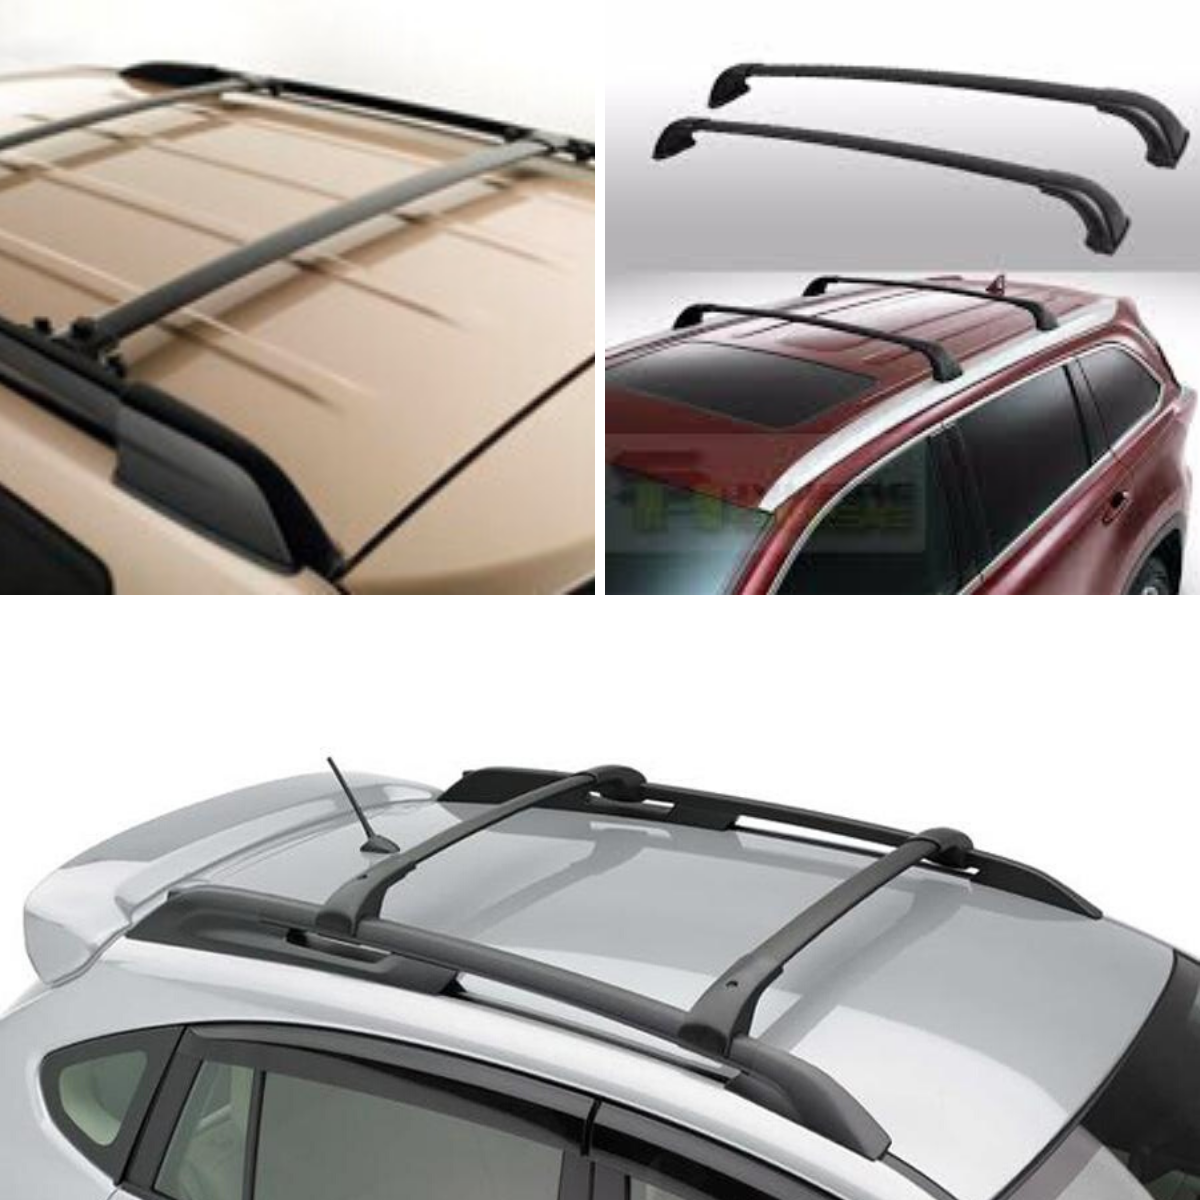 Aero Roof Rack Pads Two Sizes 28" and 19" - Small Flat Bars